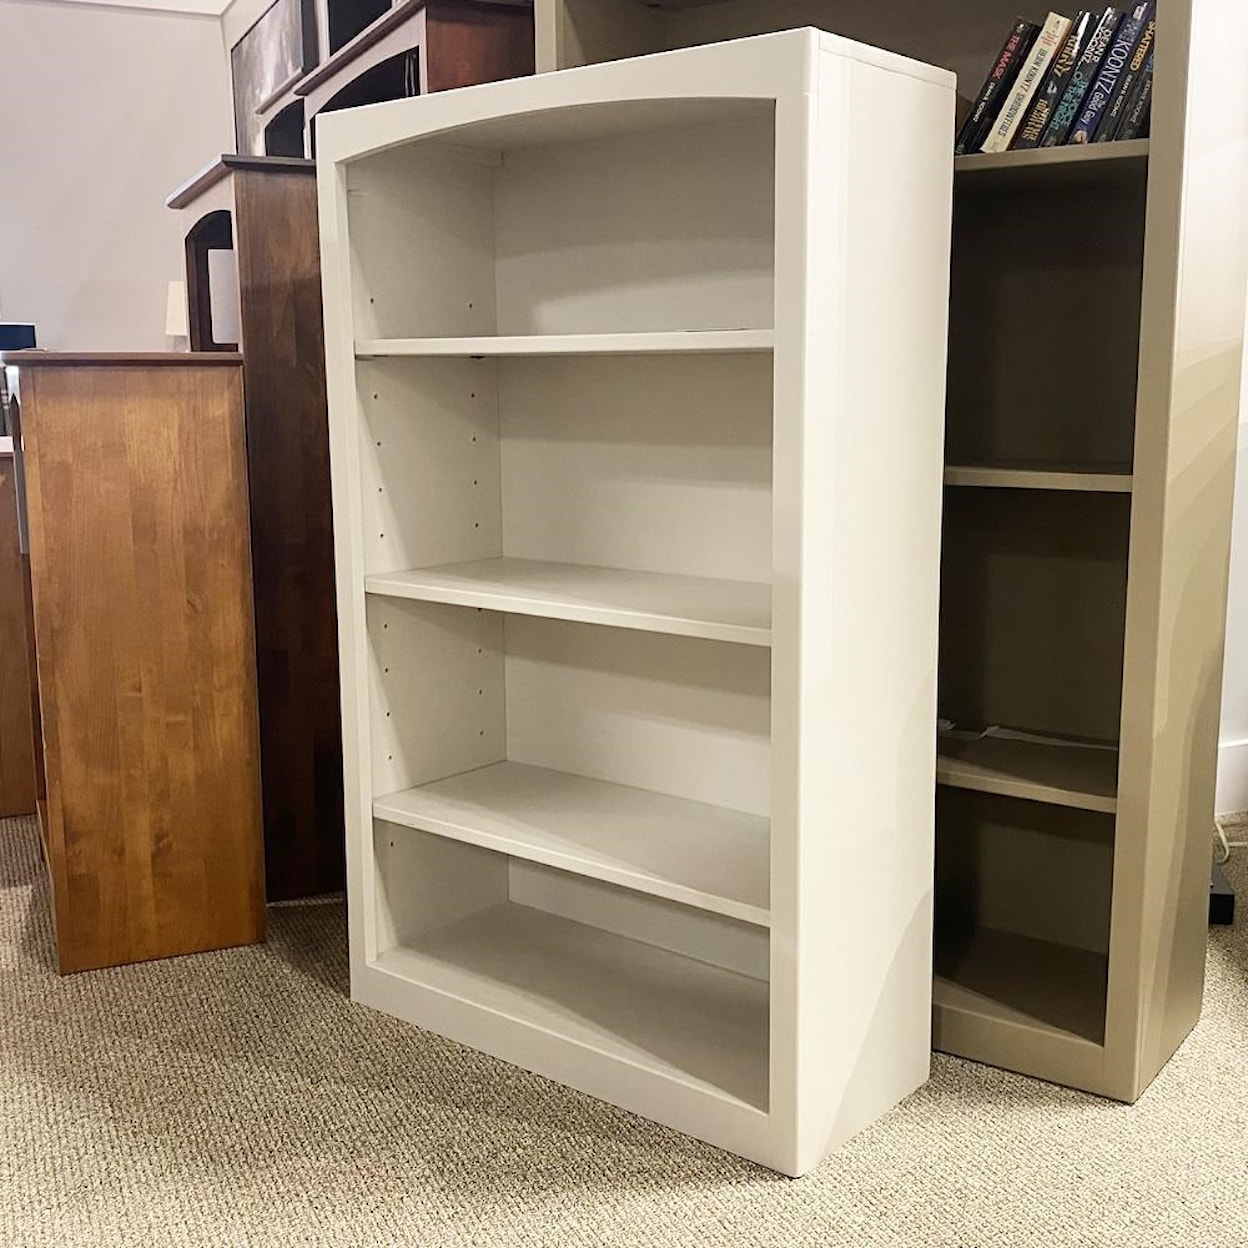 Archbold Furniture Pine Bookcases Customizable 48" Tall Pine Bookcases